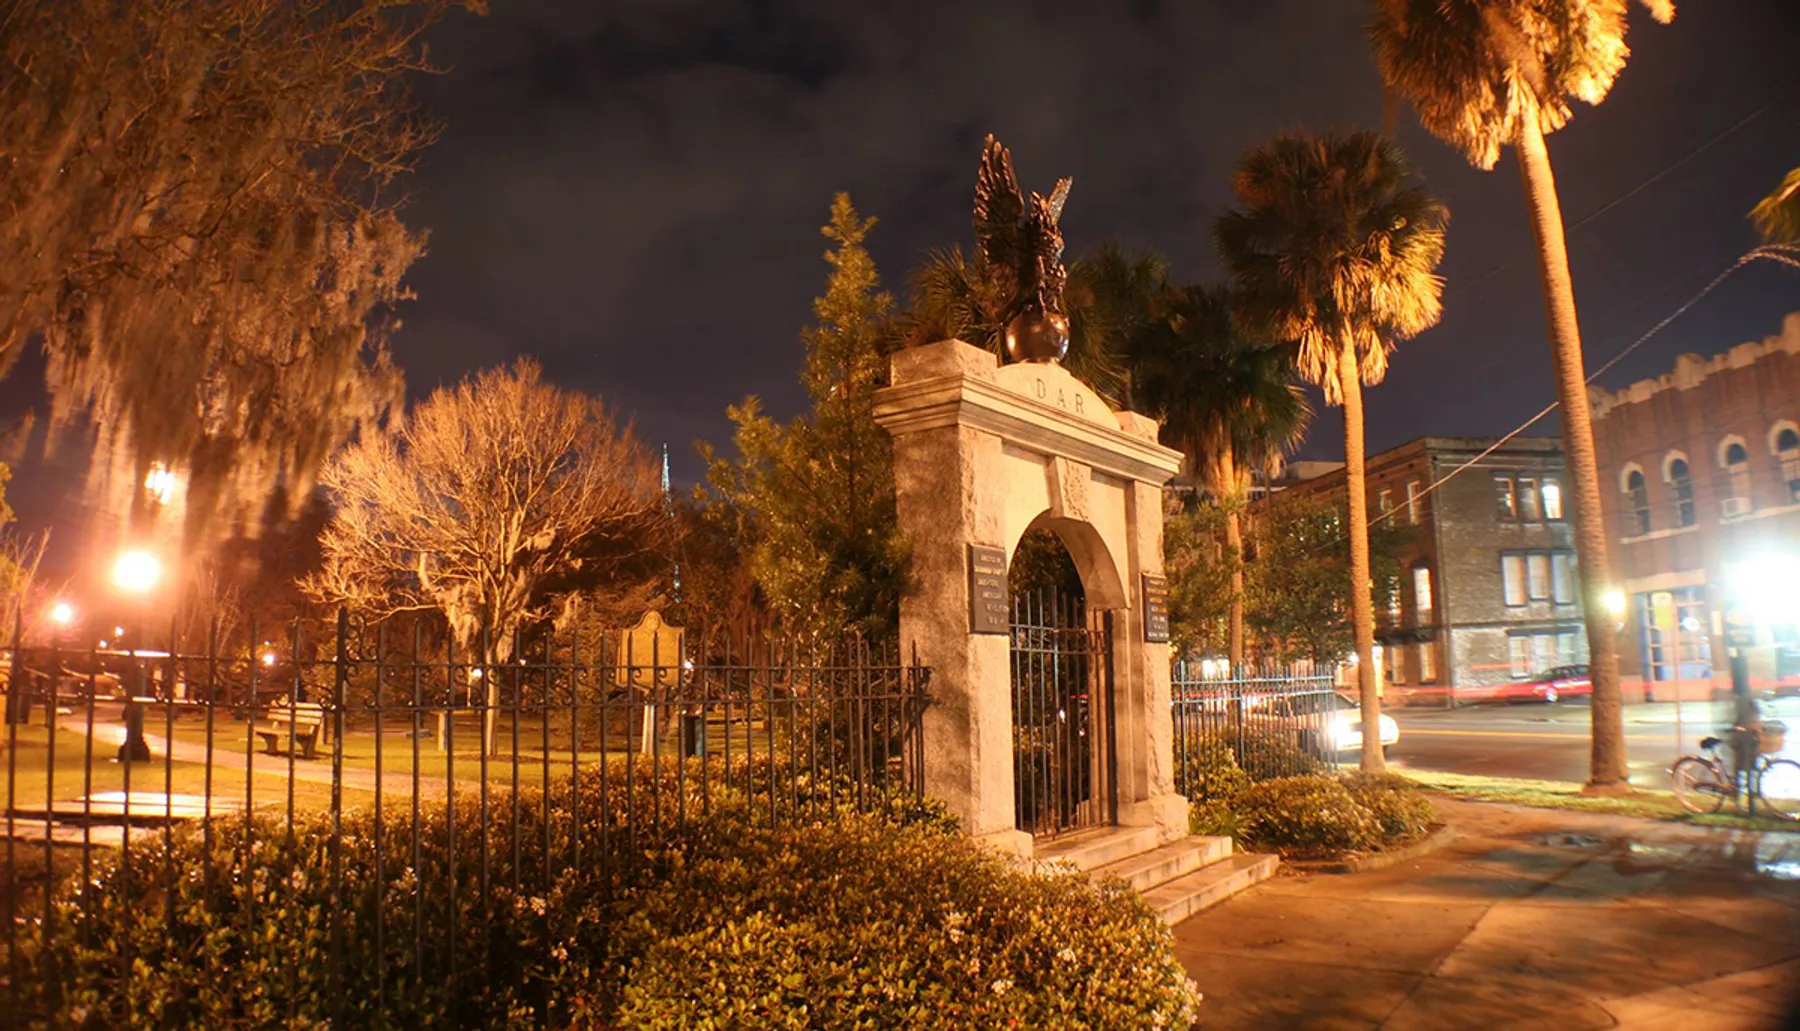 The image captures a night scene featuring an ornate gate with the acronym DAR at the entrance to a fenced area, flanked by illuminated palm trees and moss-draped trees, set against a backdrop of buildings and a dark sky.